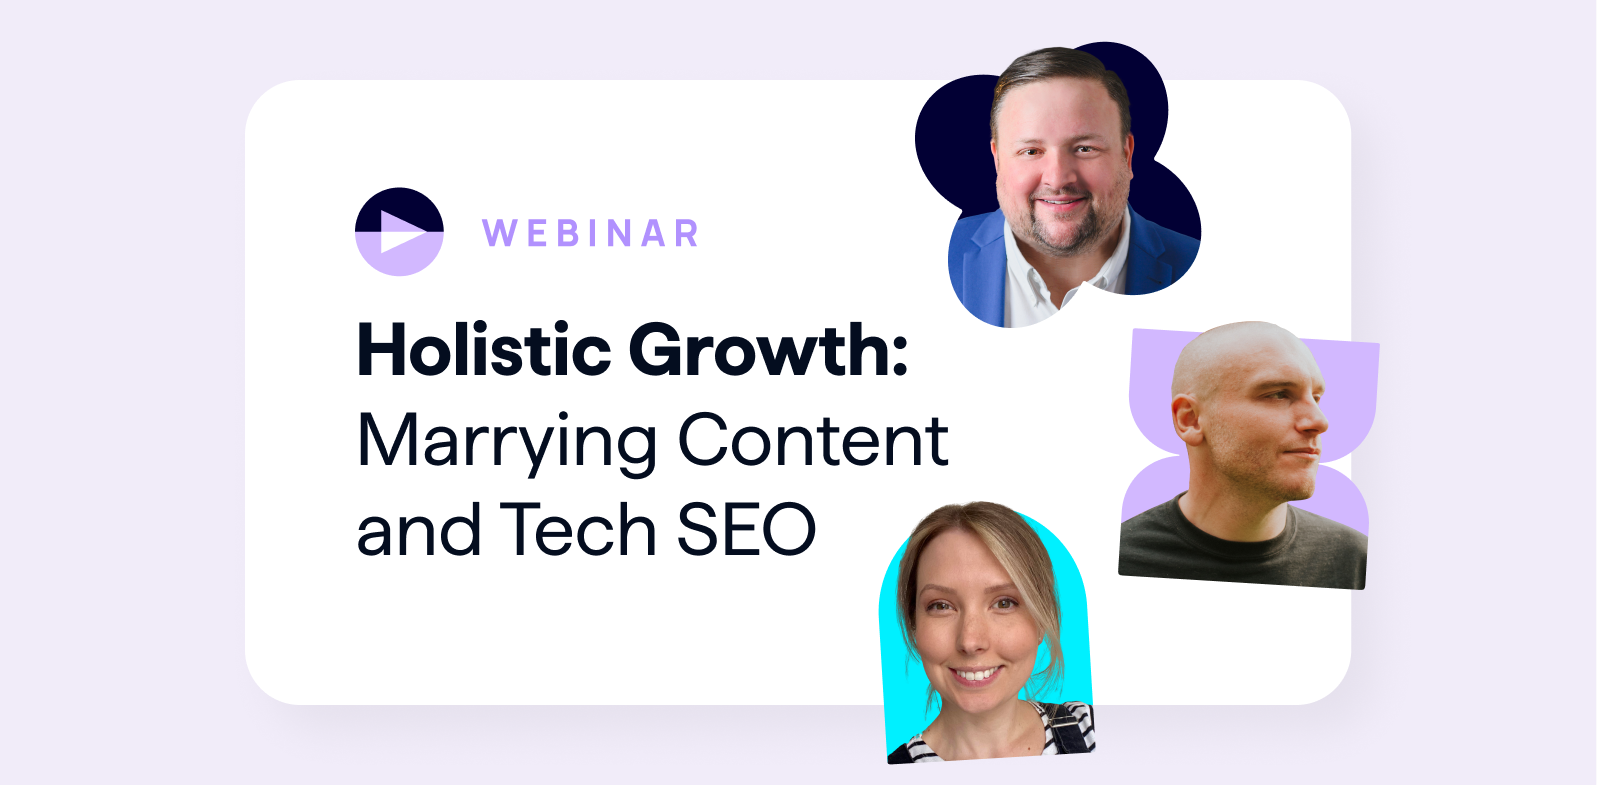 webinar featuring both Lumar and Pi Datametrics on how to grow holistically with content and tech SEO